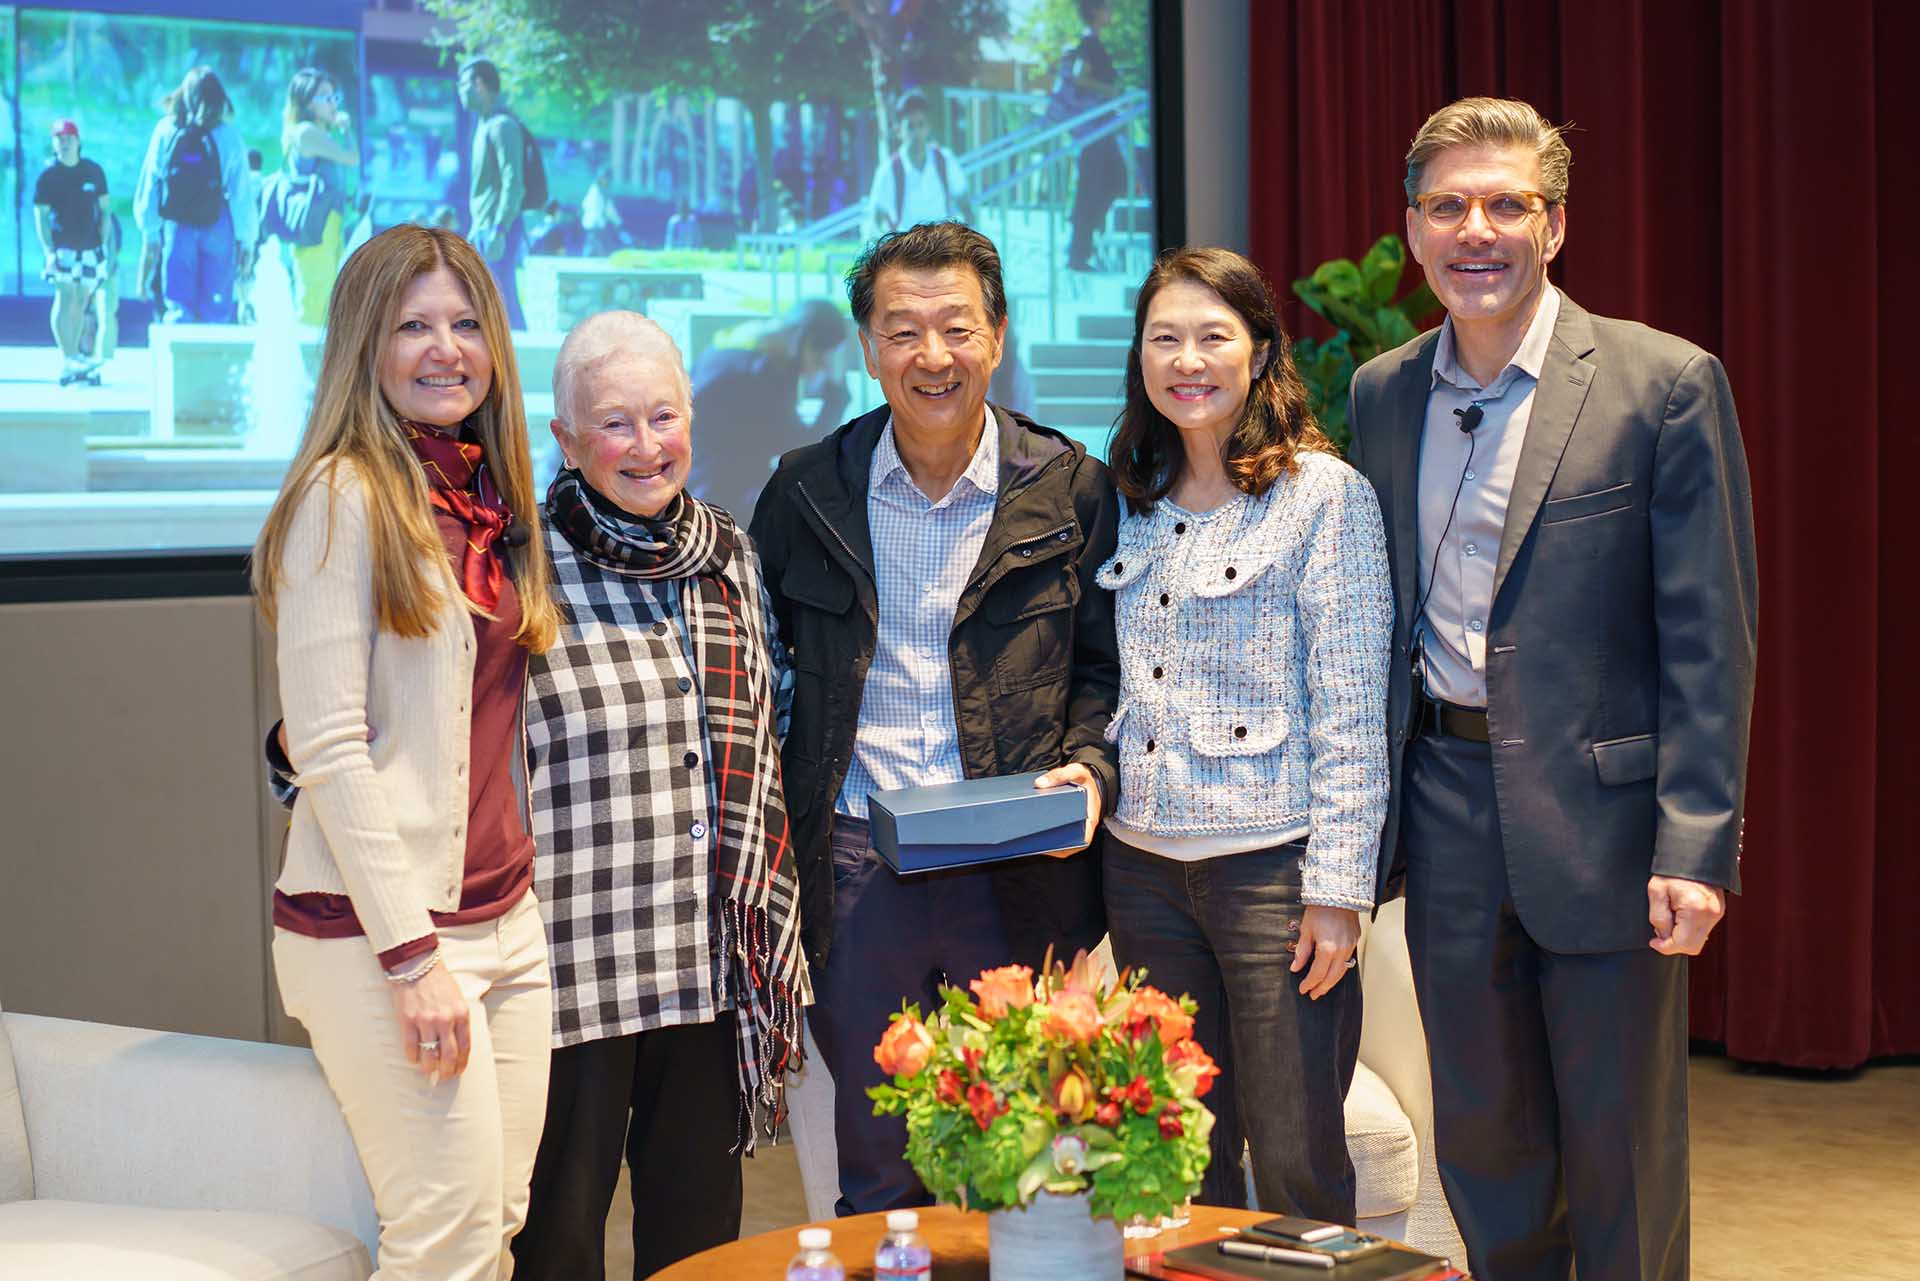 Allison Aldrich P’24 (left), president of the CMC Parent Network Board, with Jil Stark ’58 GP’11, recipients Bobby and Robin Lee P’24, and President Hiram Chodosh.